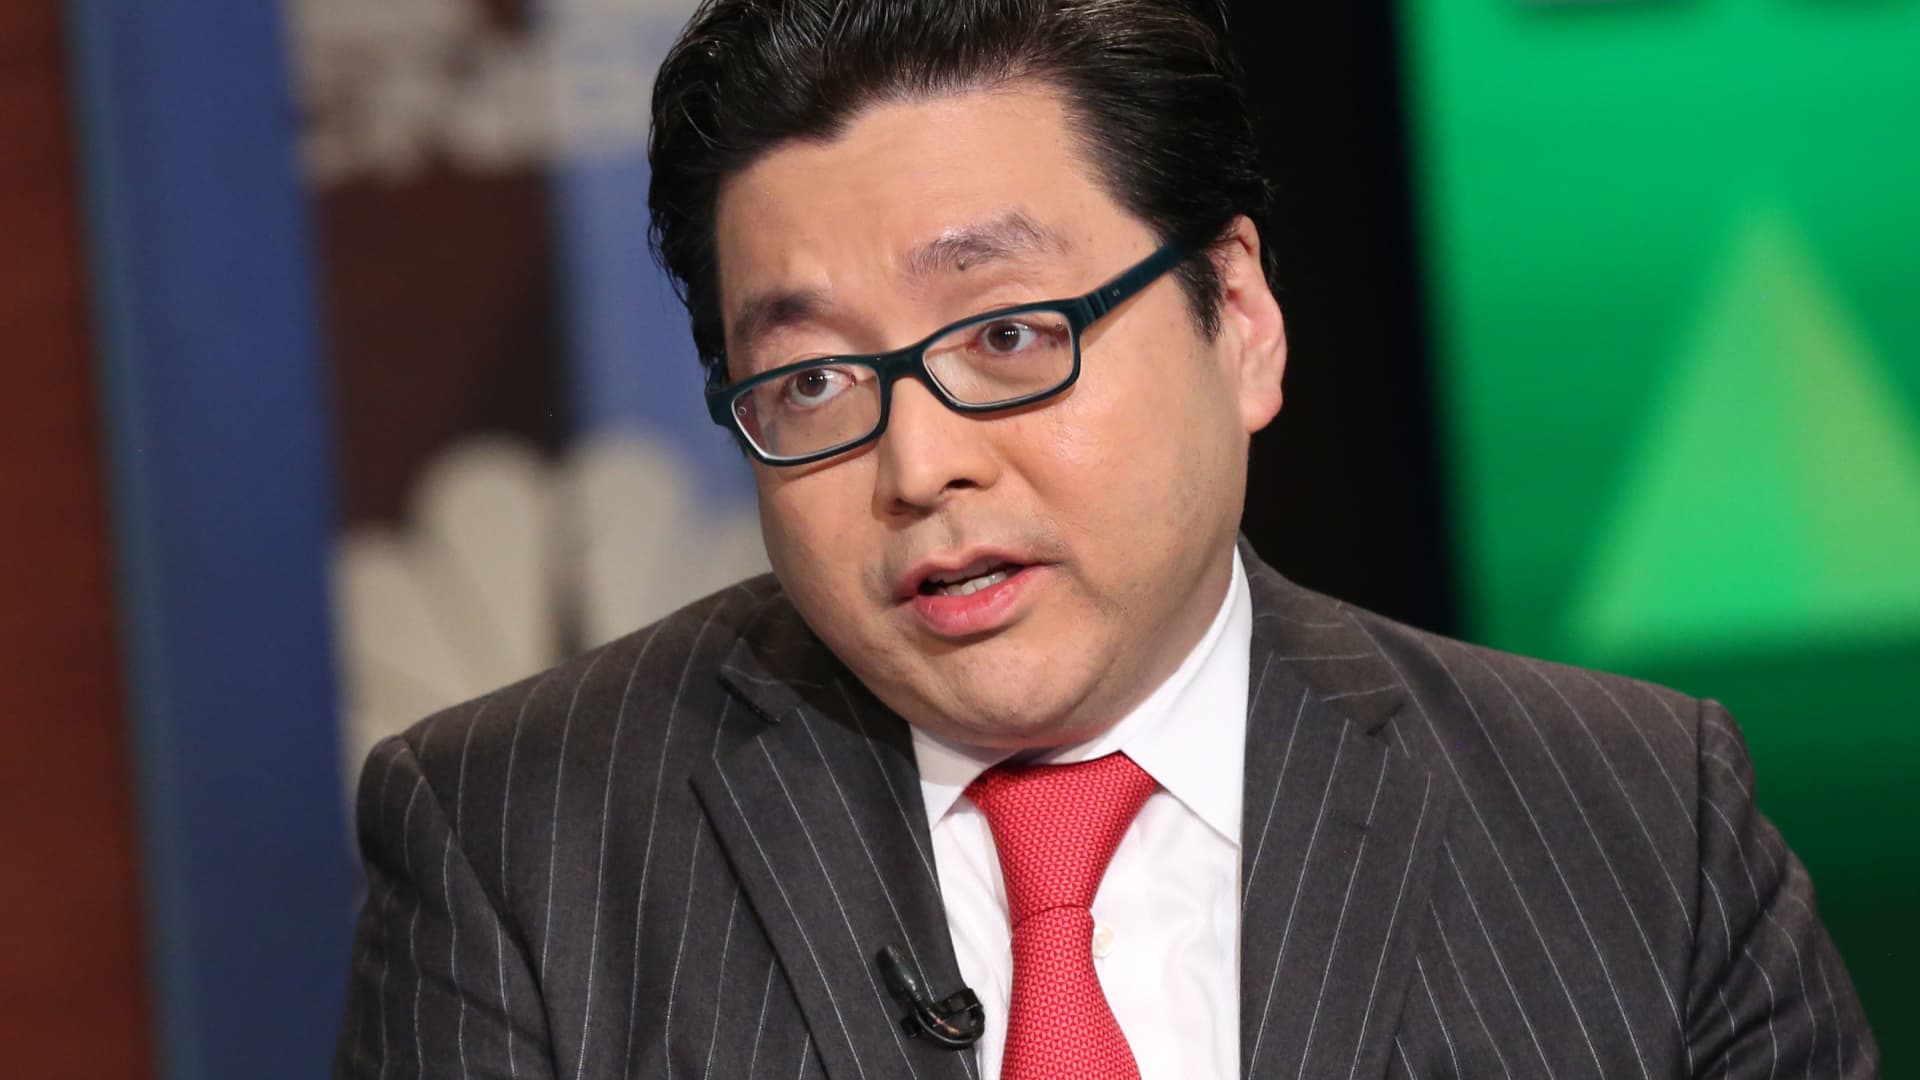 Energy stocks could double next year even in a flat market, according to Fundstrat’s Tom Lee